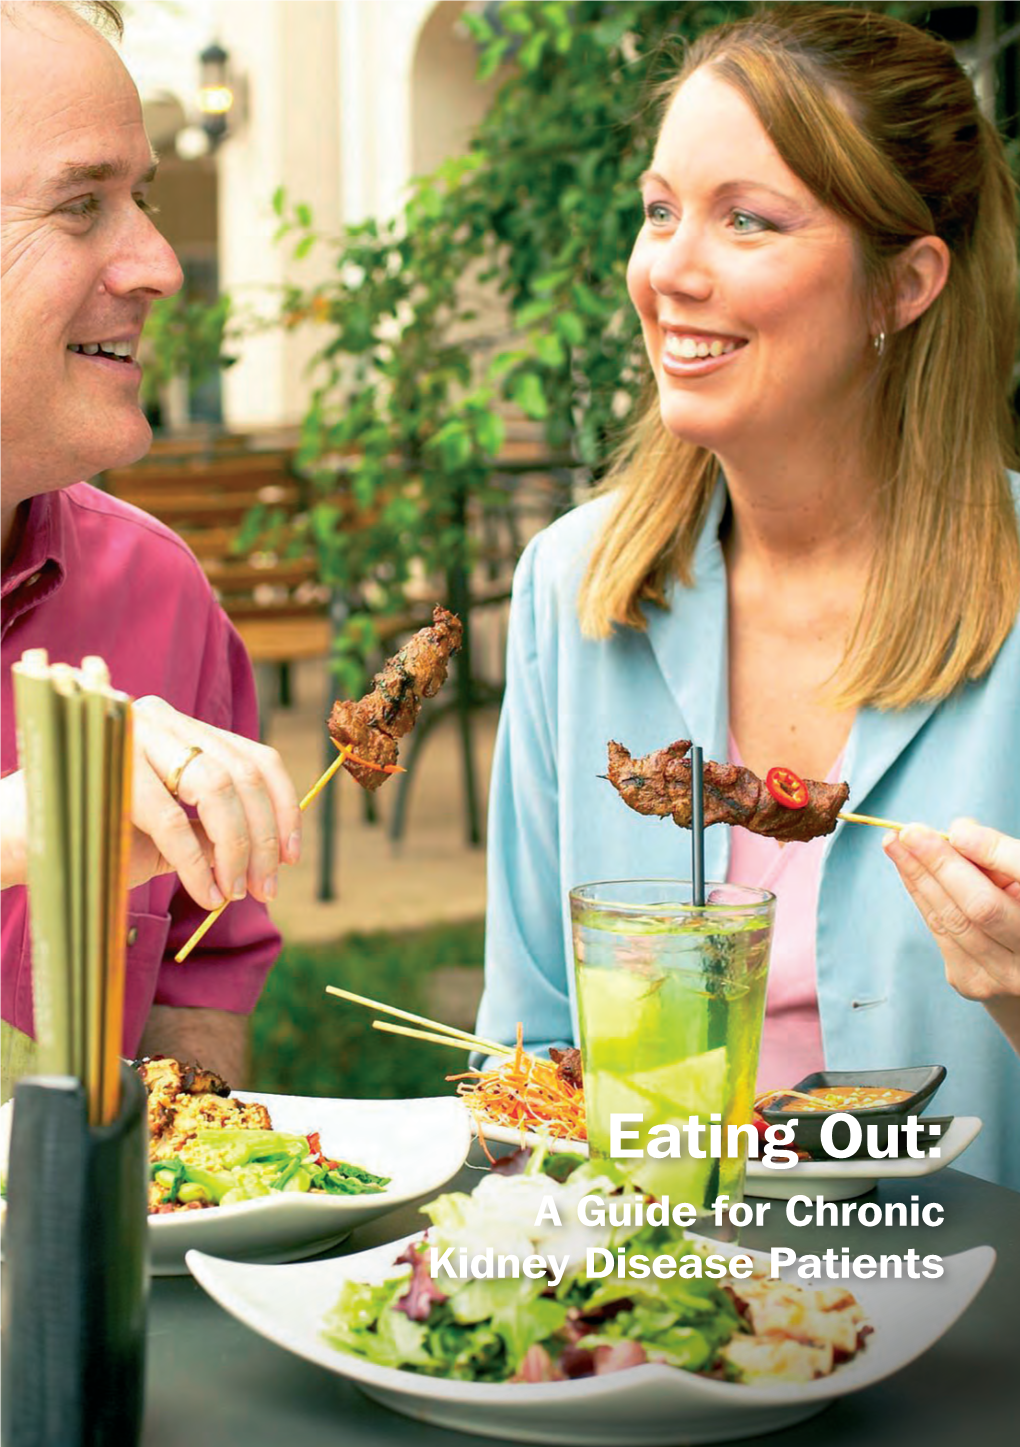 Eating Out: a Guide for Chronic Kidney Disease Patients